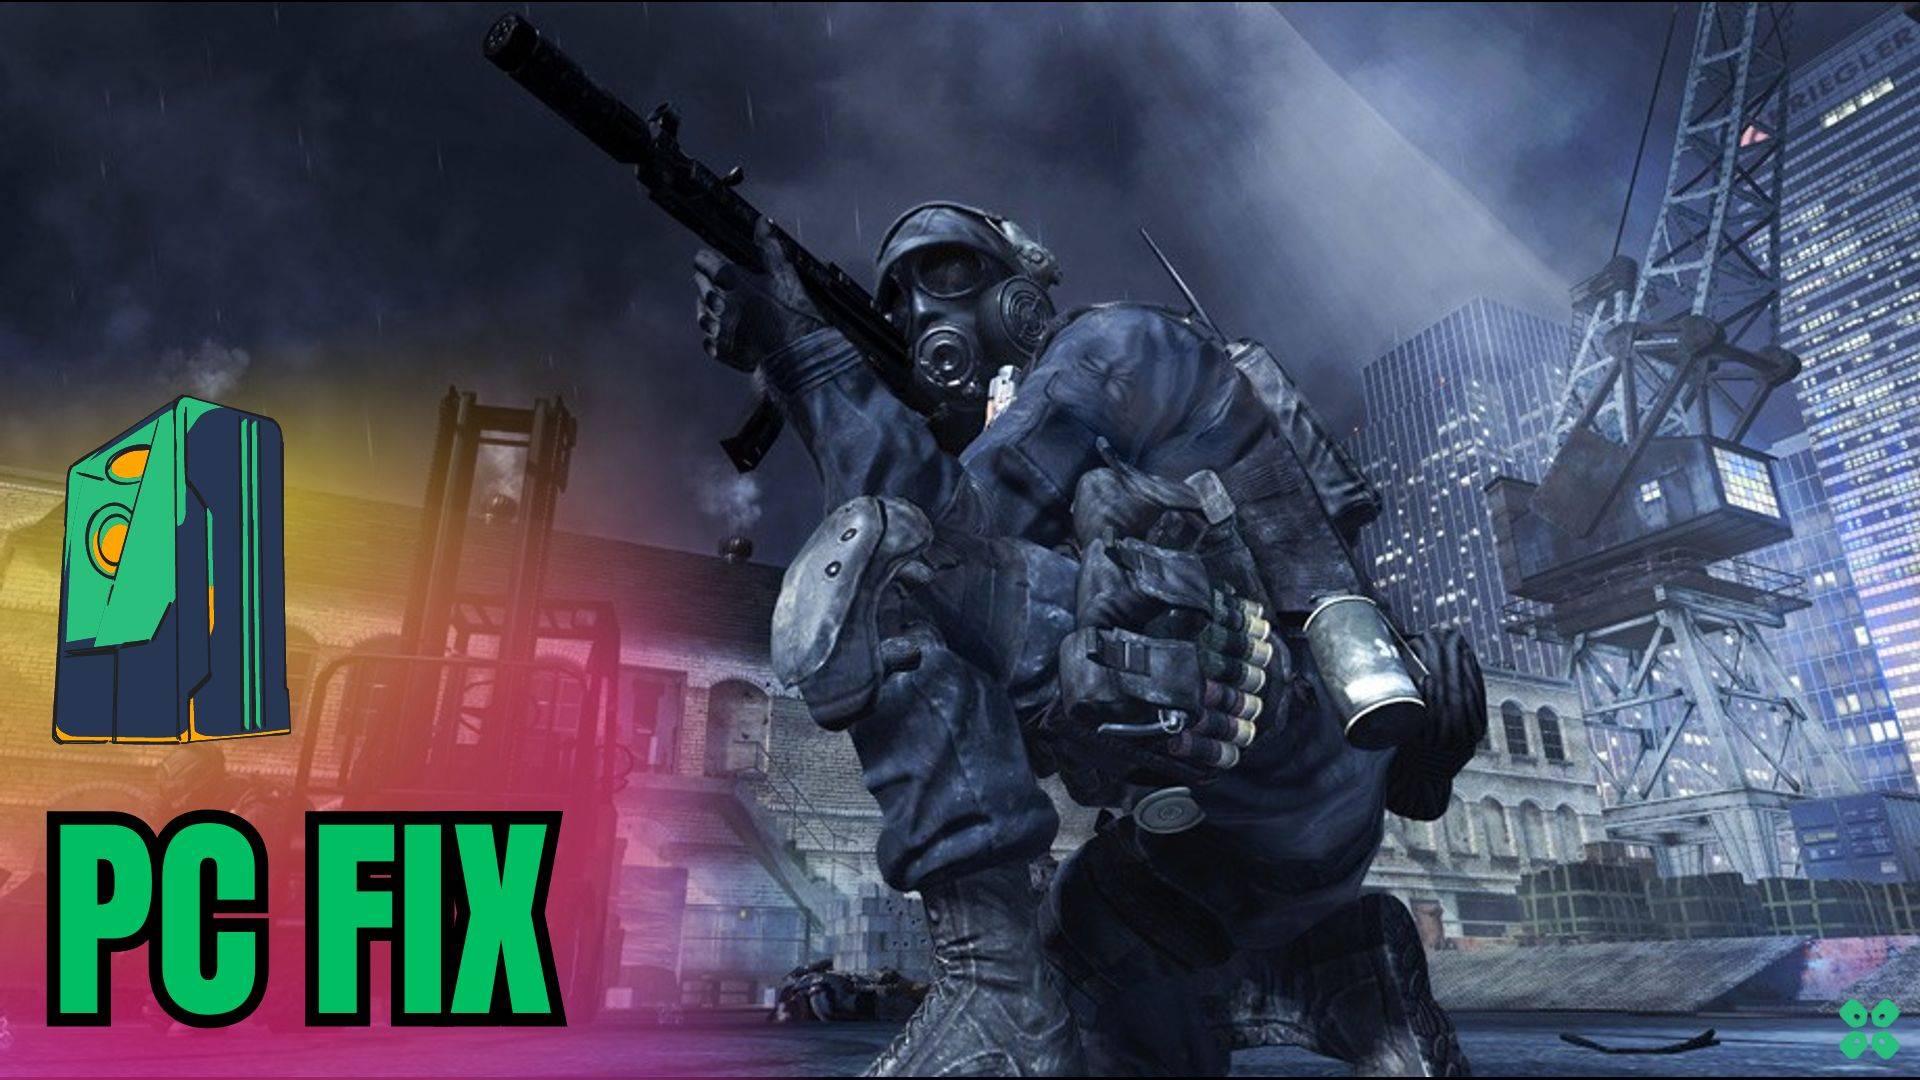 Artwork of Call of Duty Modern Warfare 3 and its fix of lagging by TCG